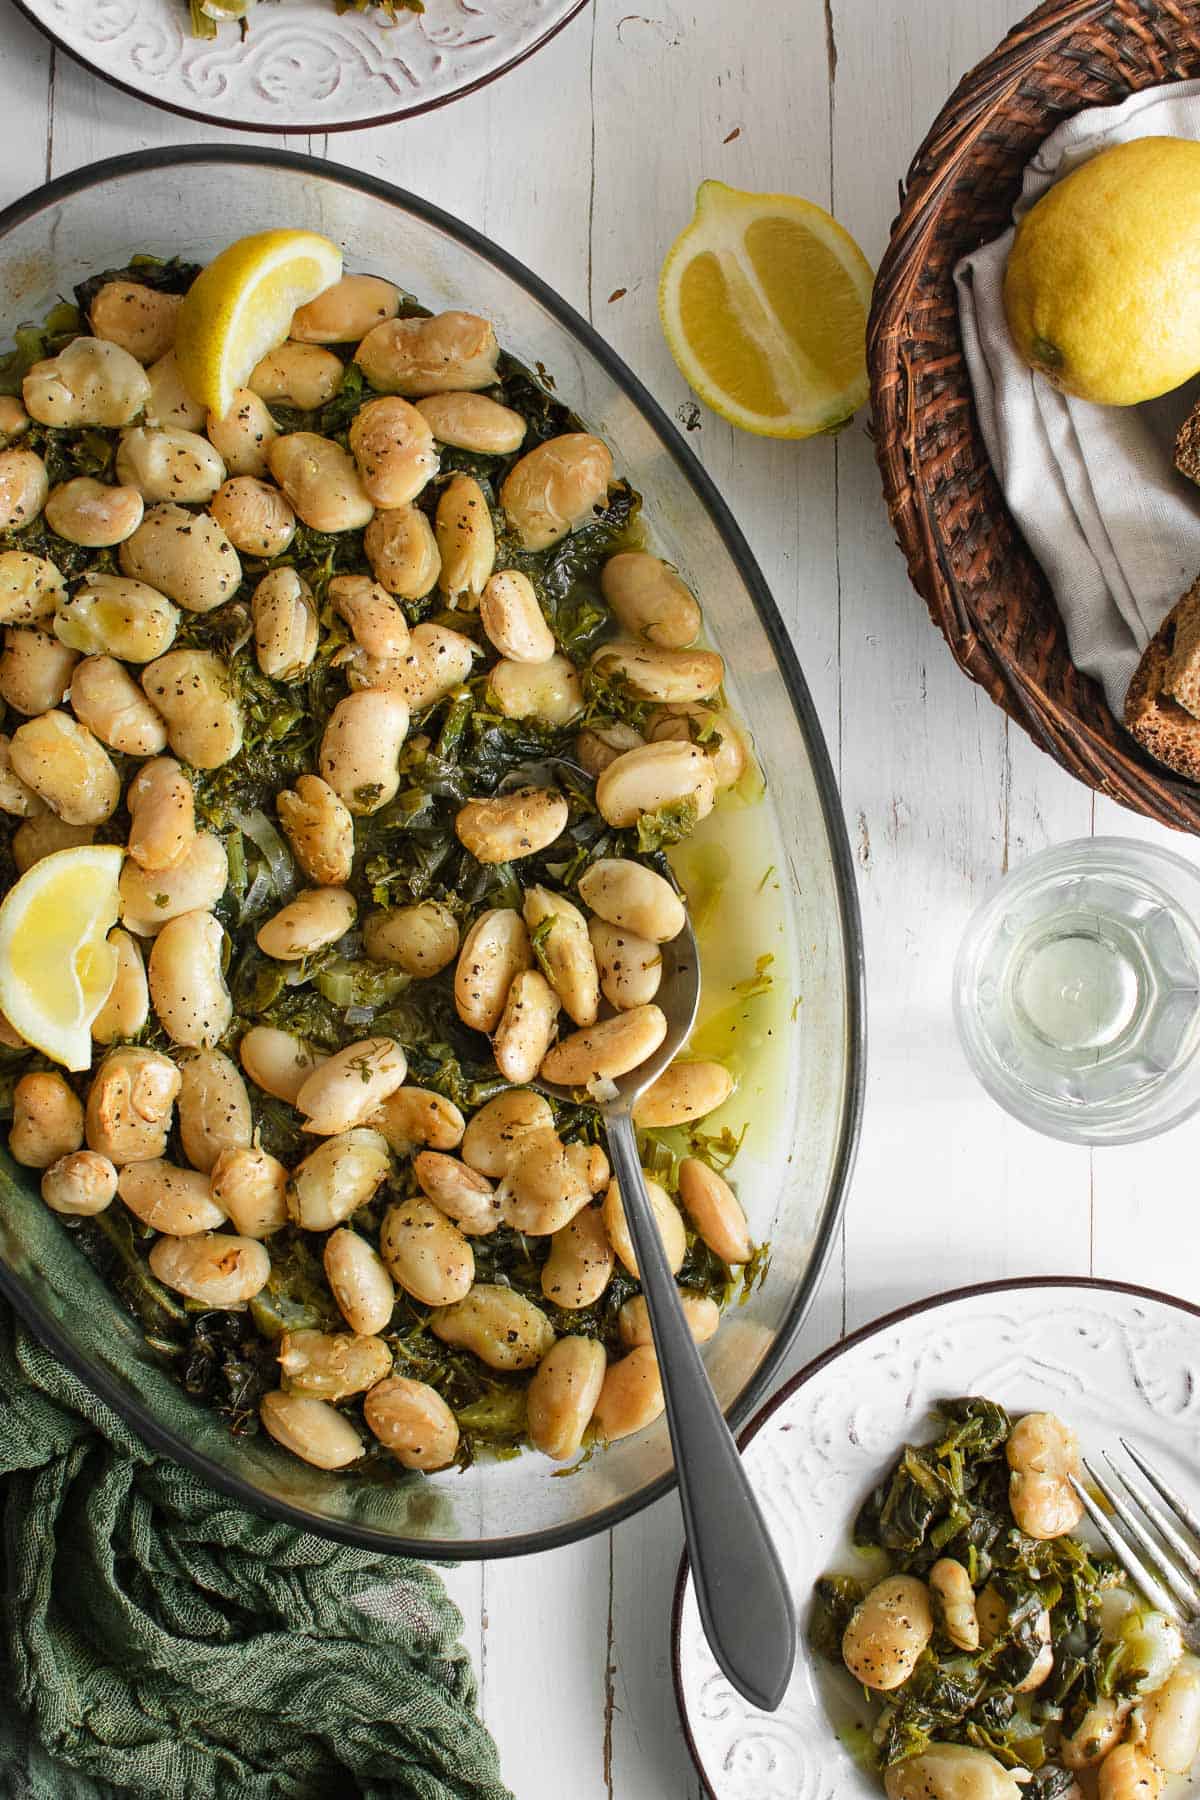 Baked Butter Beans With Greens